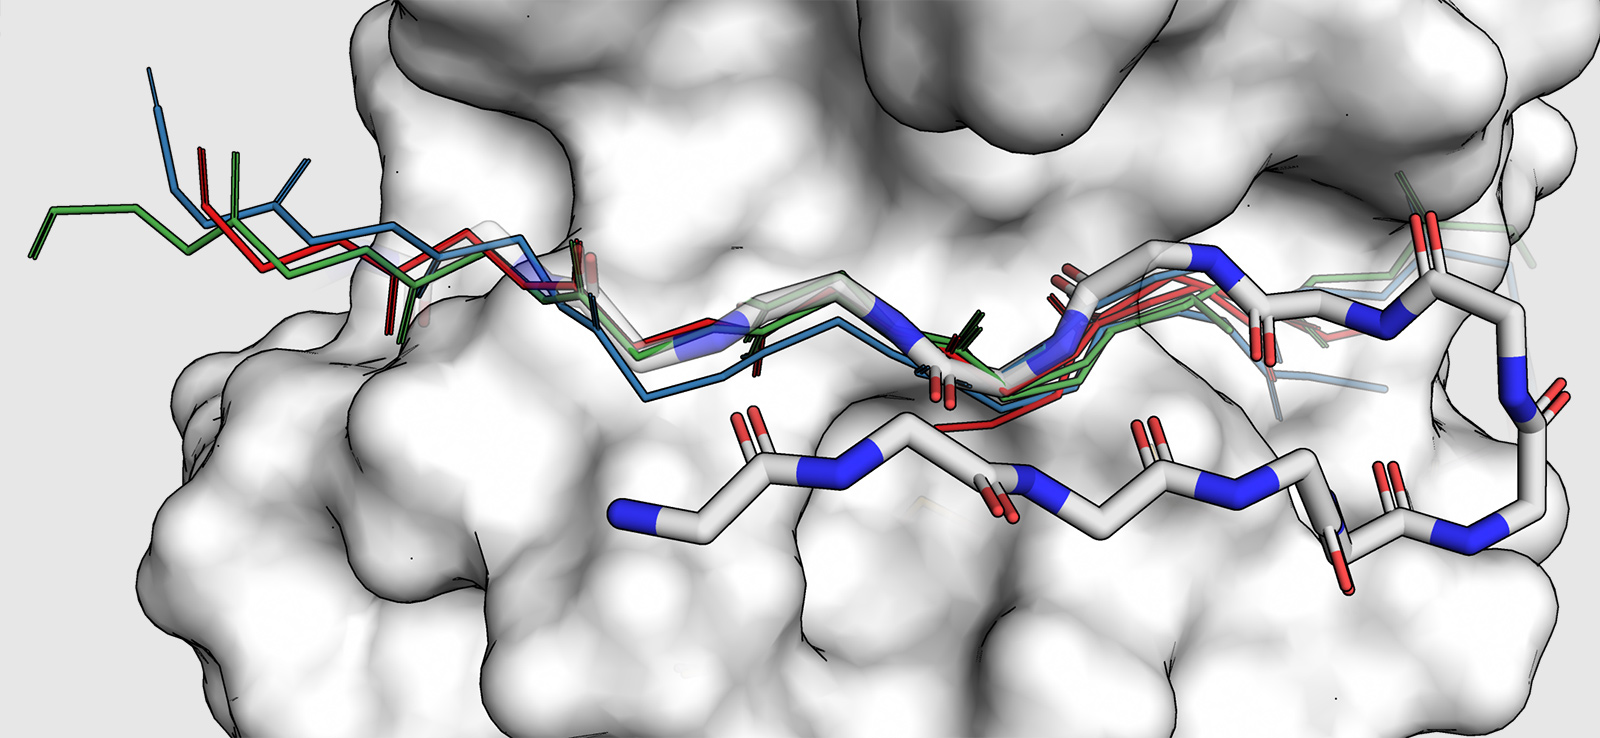 This image, produced by doctoral student Sebastian Swanson, shows how such methods can build up a model for a new backbone by combining small pieces of structure taken from other proteins. Image: Sebastian Swanson